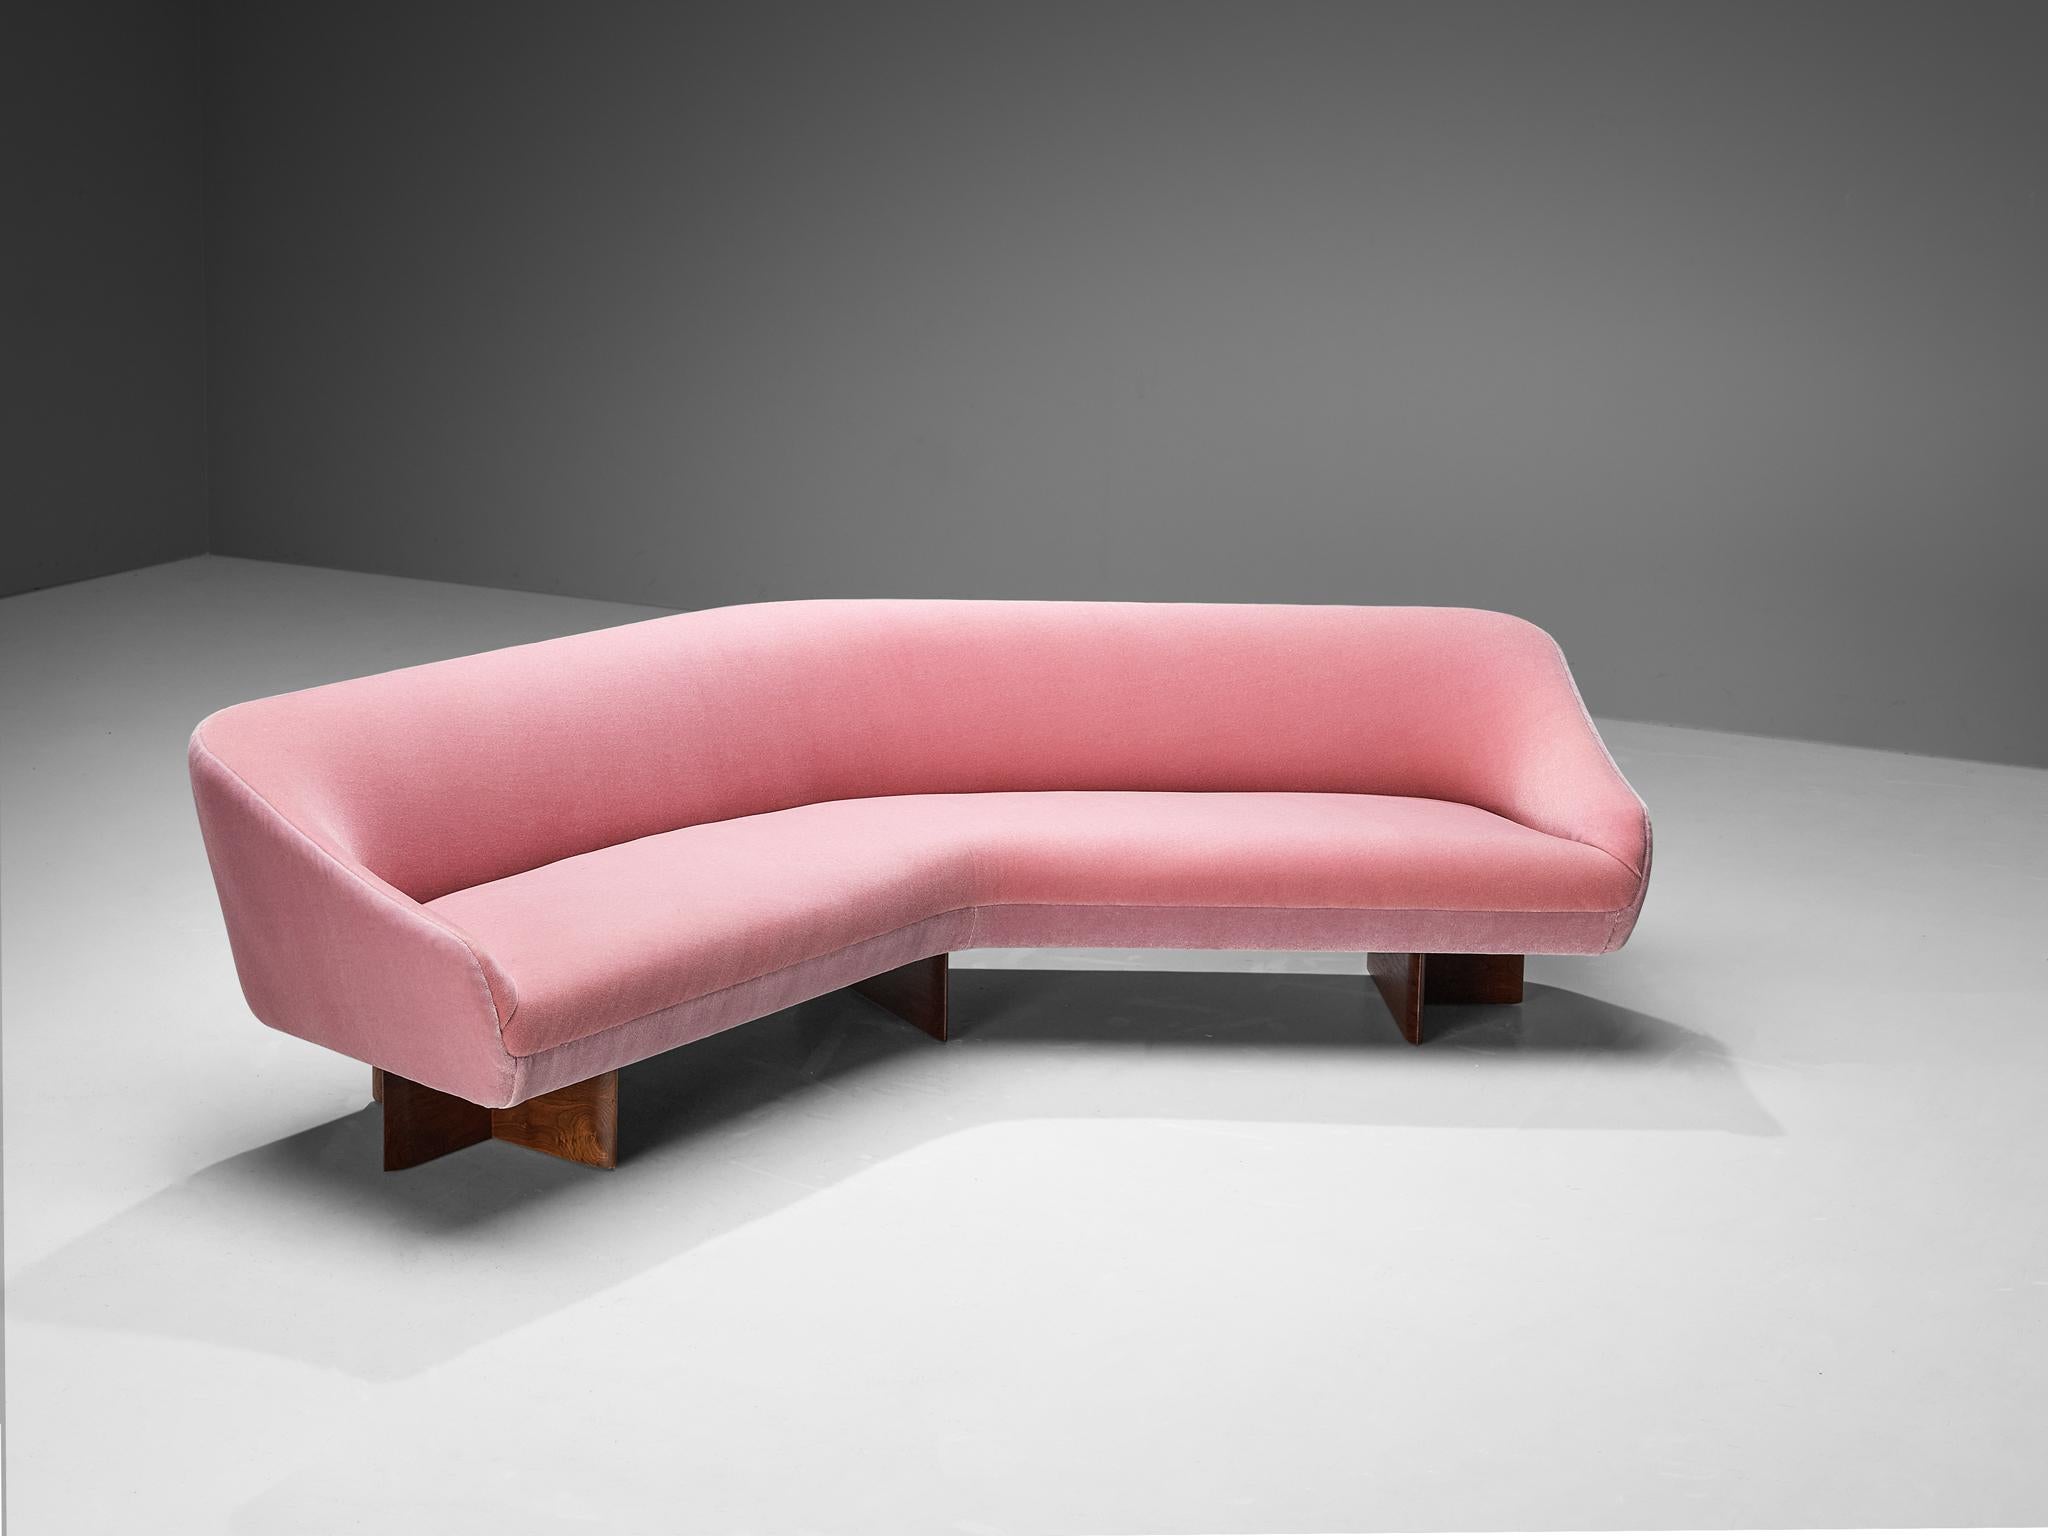 Vladimir Kagan for Vladimir Kagan Designs, Inc., ‘Wide Angle’ sofa, model ‘W 506’, reupholstered in mohair “Bold Platre” and “Bold Piggy” by Pierre Frey, walnut, United States, circa 1970

This rare ‘Wide Angle’ sofa is designed by Vladimir Kagan